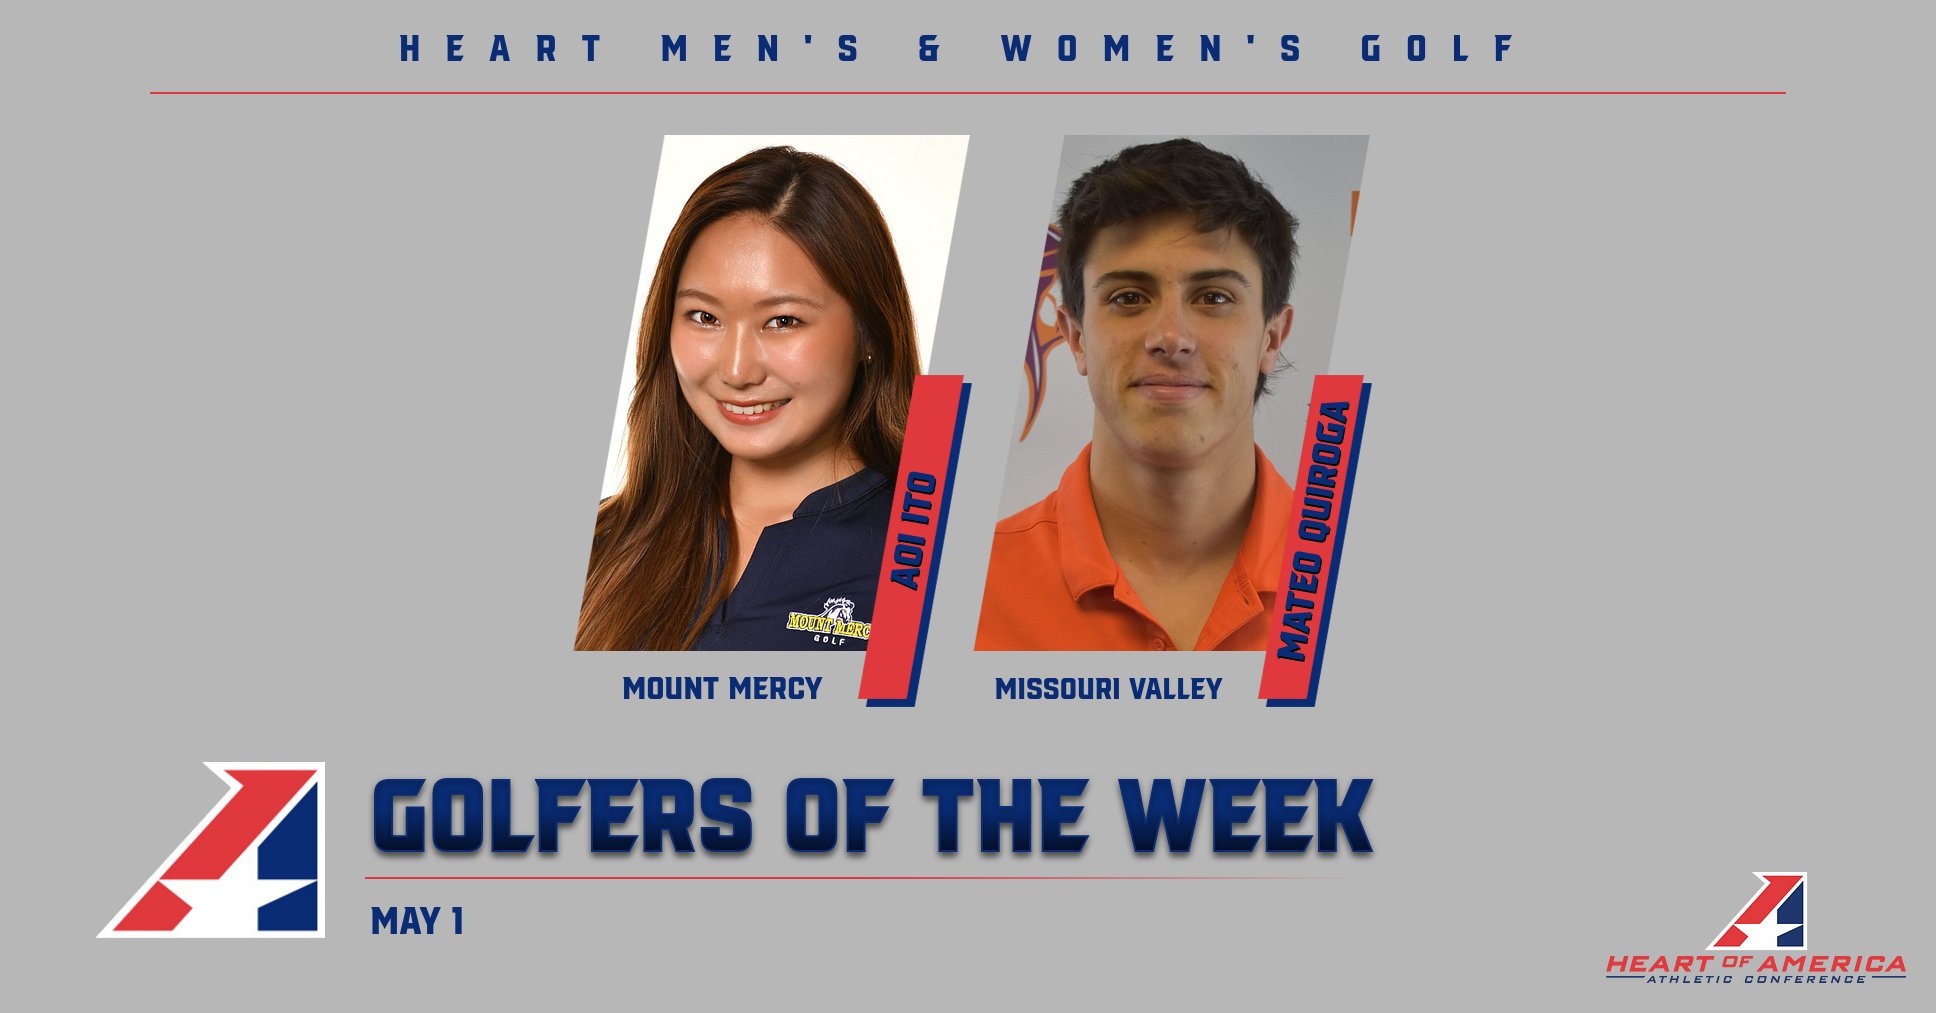 Quiroga, Ito Collect Heart Men’s and Women’s Golfer of the Week Awards